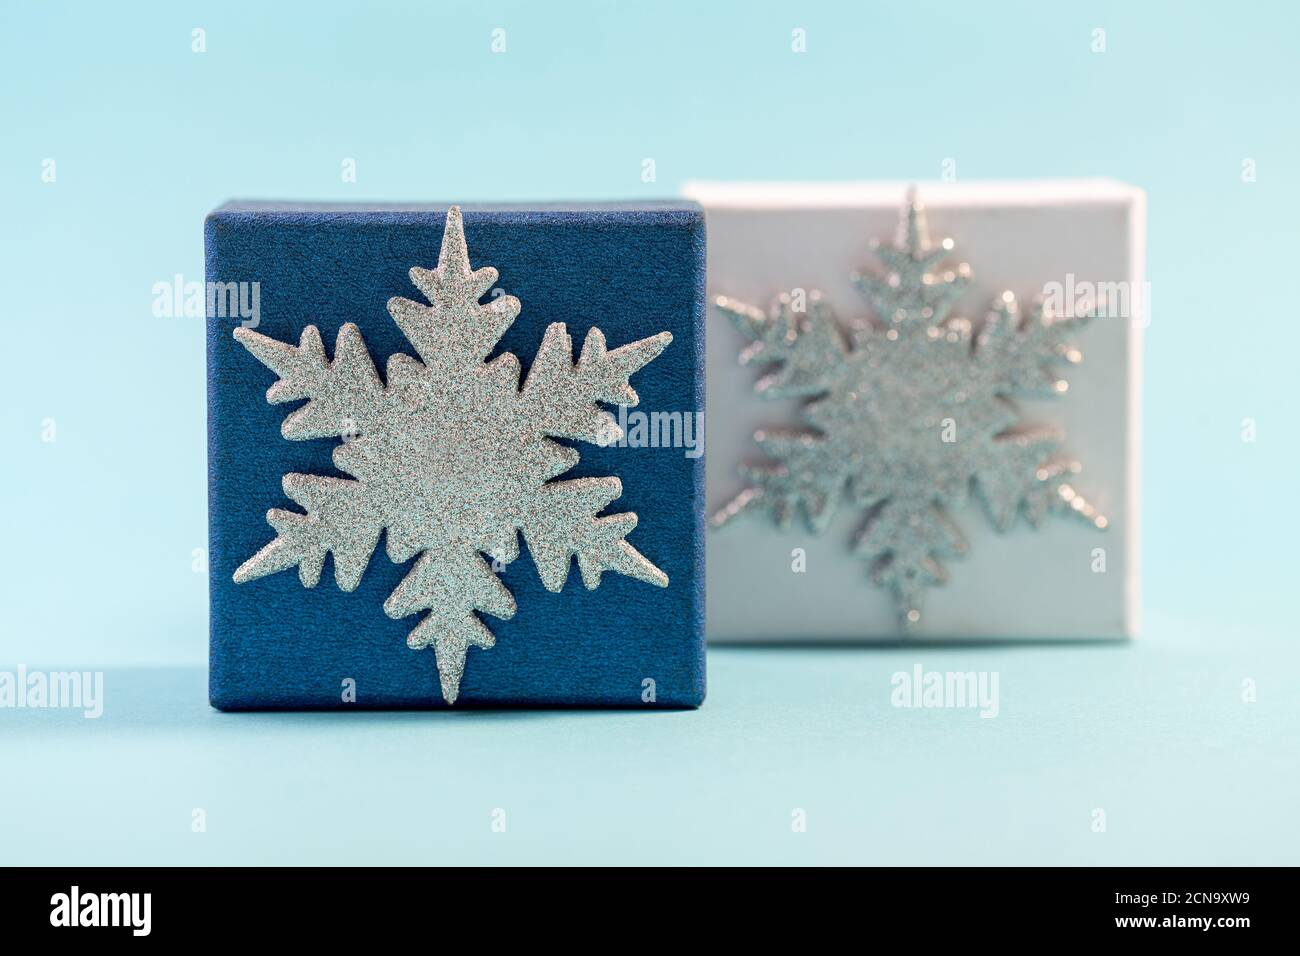 Abstract Christmas composition with snowflakes. Stock Photo